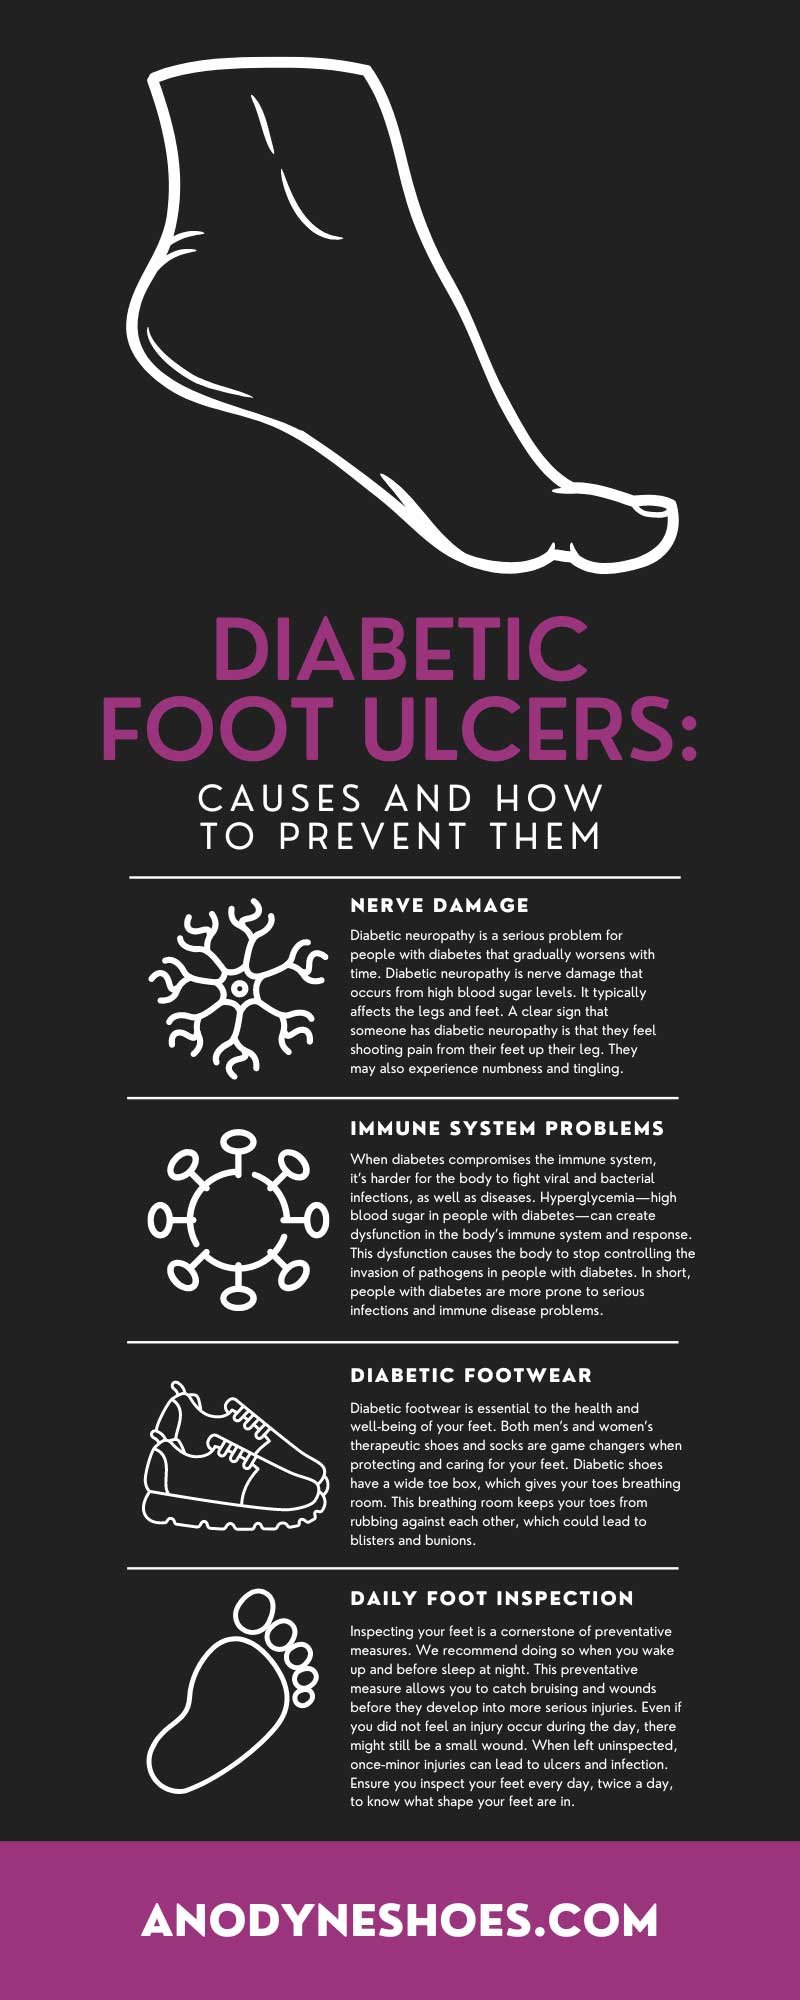 Diabetic Foot Ulcers: Causes and How To Prevent Them